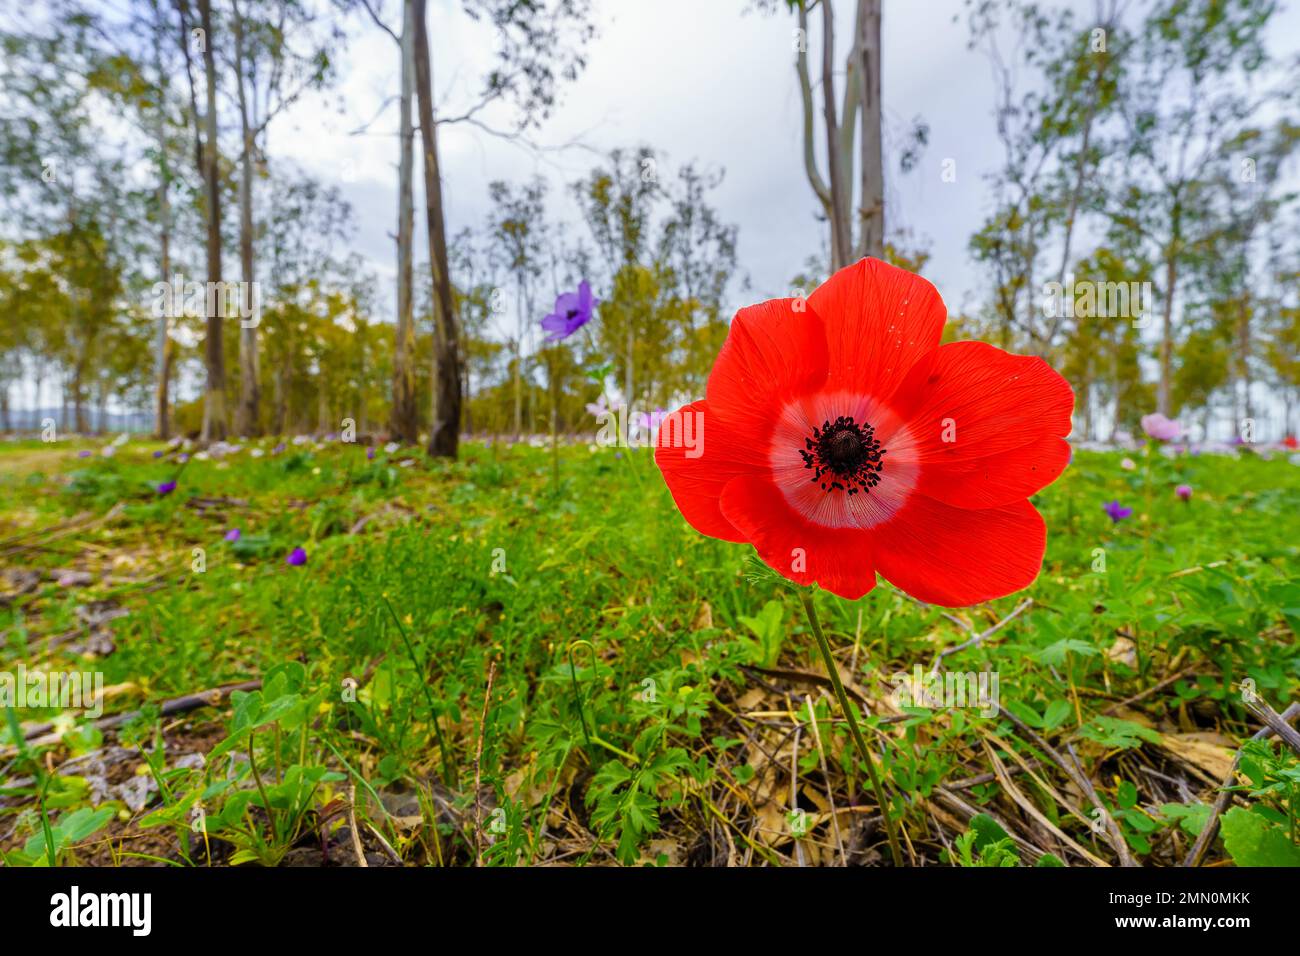 View of colorful Anemone wildflowers in a Eucalyptus grove, near Megiddo, Jezreel Valley, Northern Israel Stock Photo